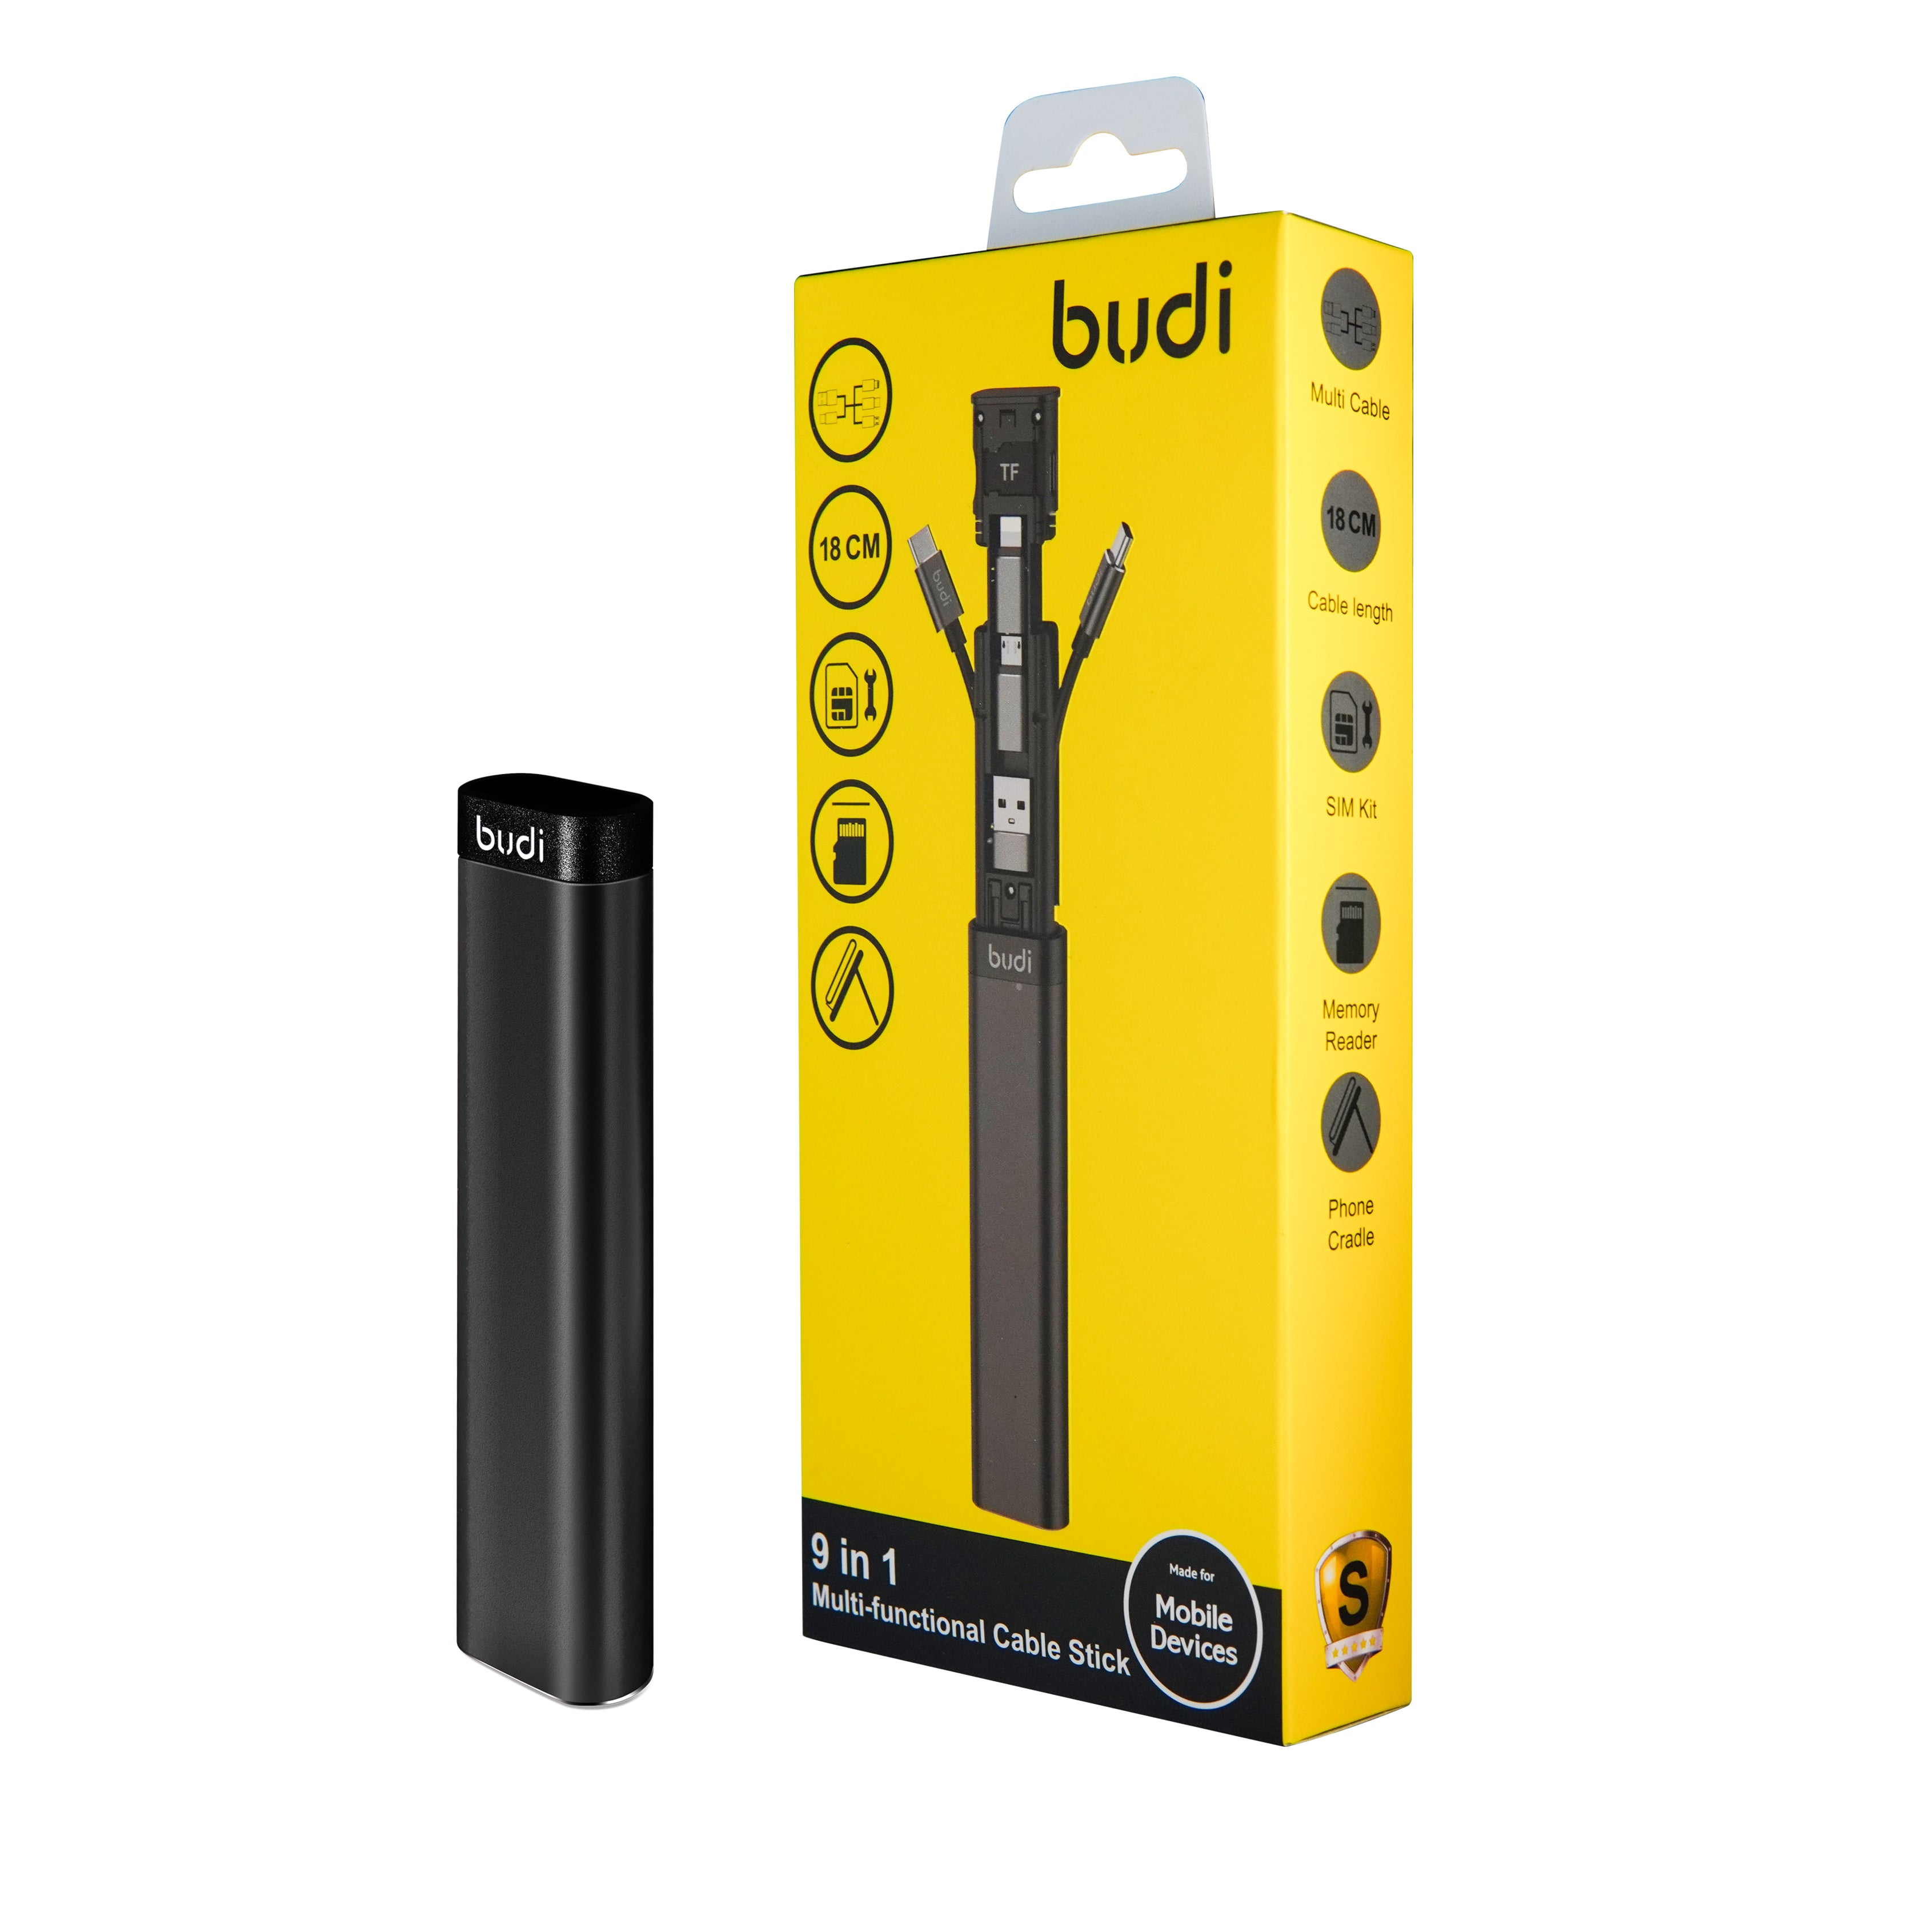 budi 9 in 1 Multi Function Cable Stick | Shopna Online Store .